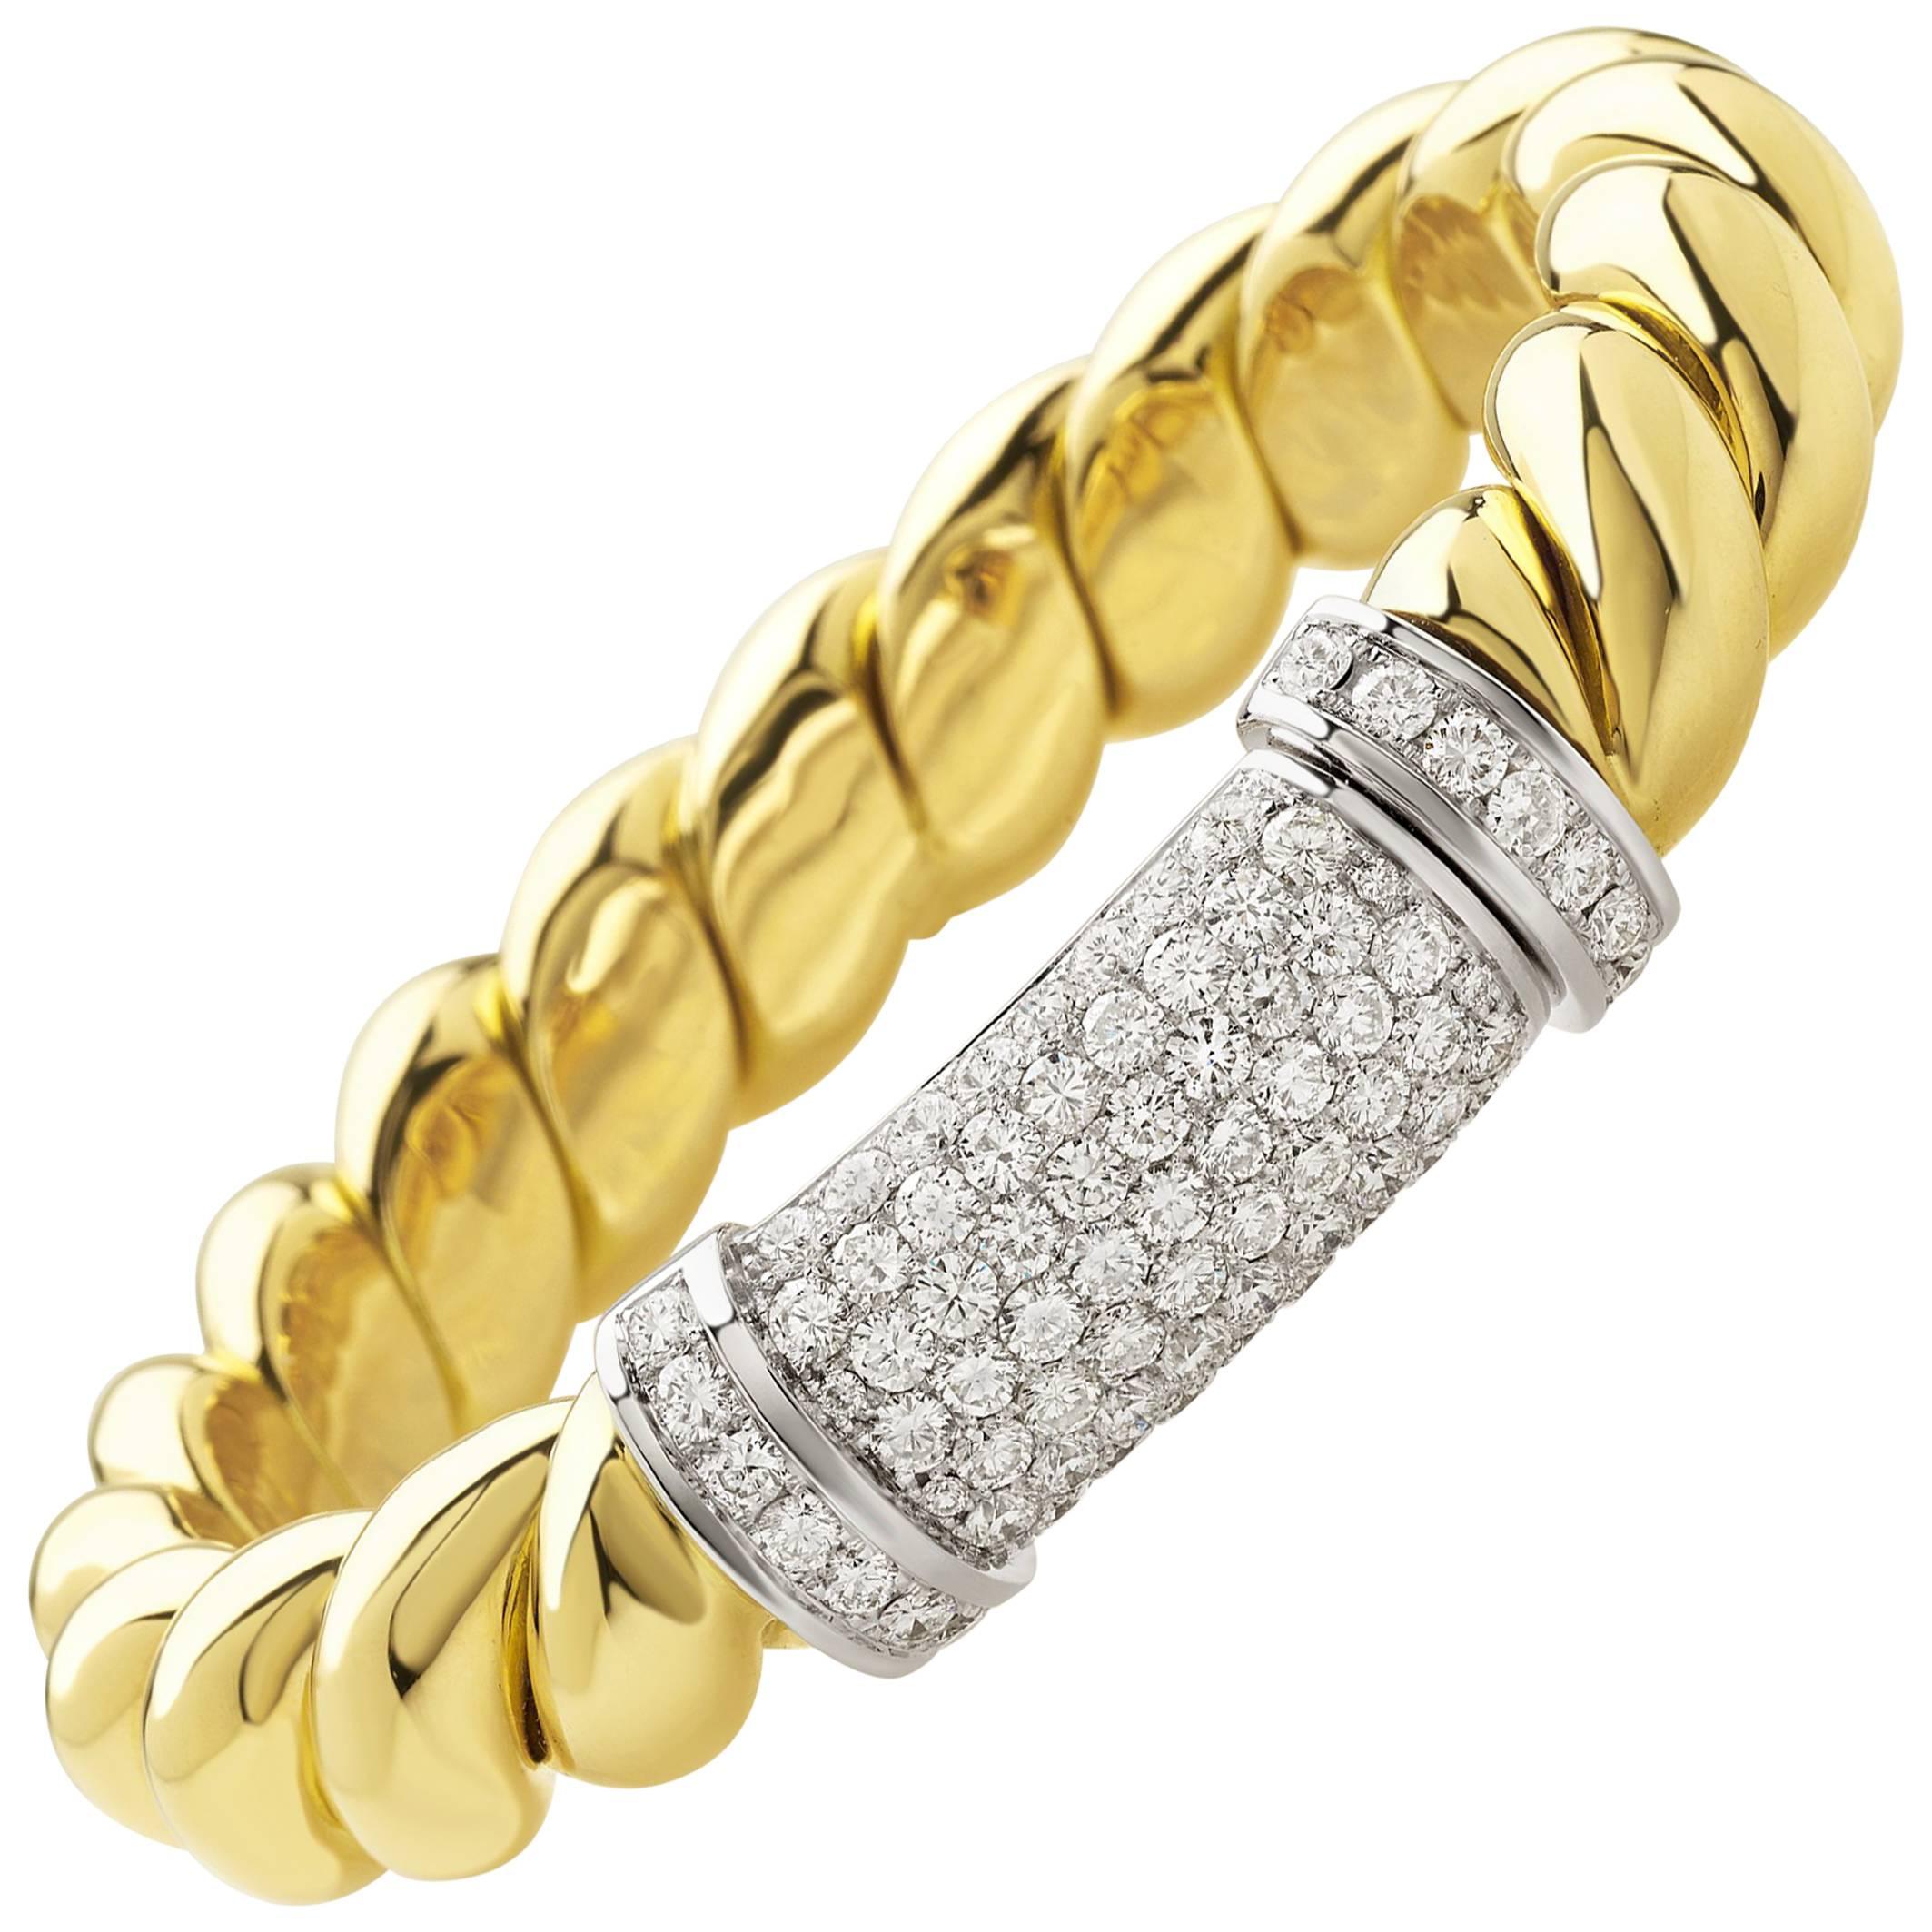 Bangle from the Collection "Rope" 18 Karat Yellow Gold and Diamonds For Sale